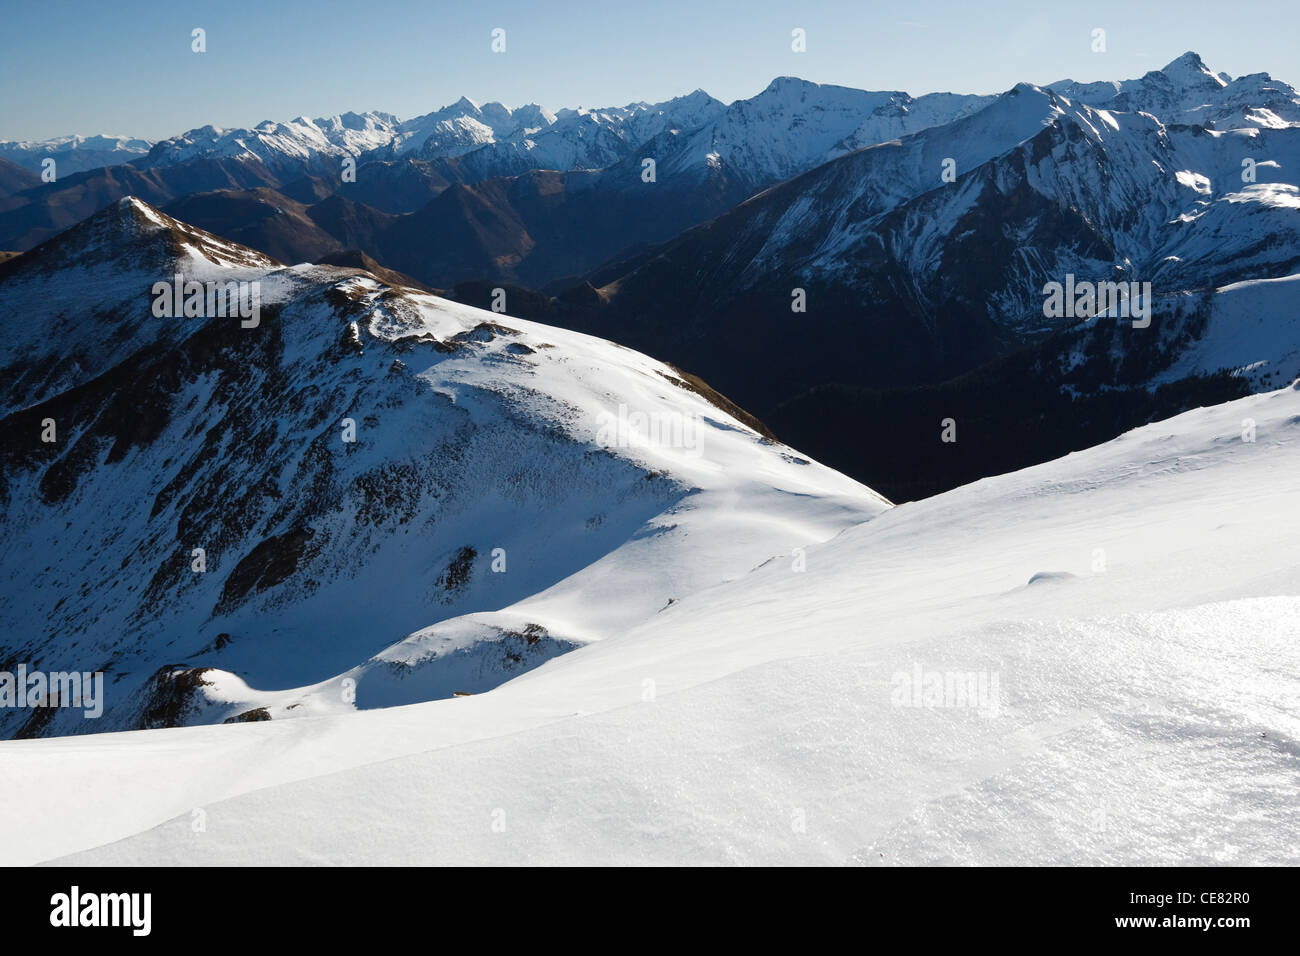 View from Pic de la Calabasse (2210 metres), near Saint-Lary, Pays Couserans, Ariege, Pyrenees, France. Stock Photo